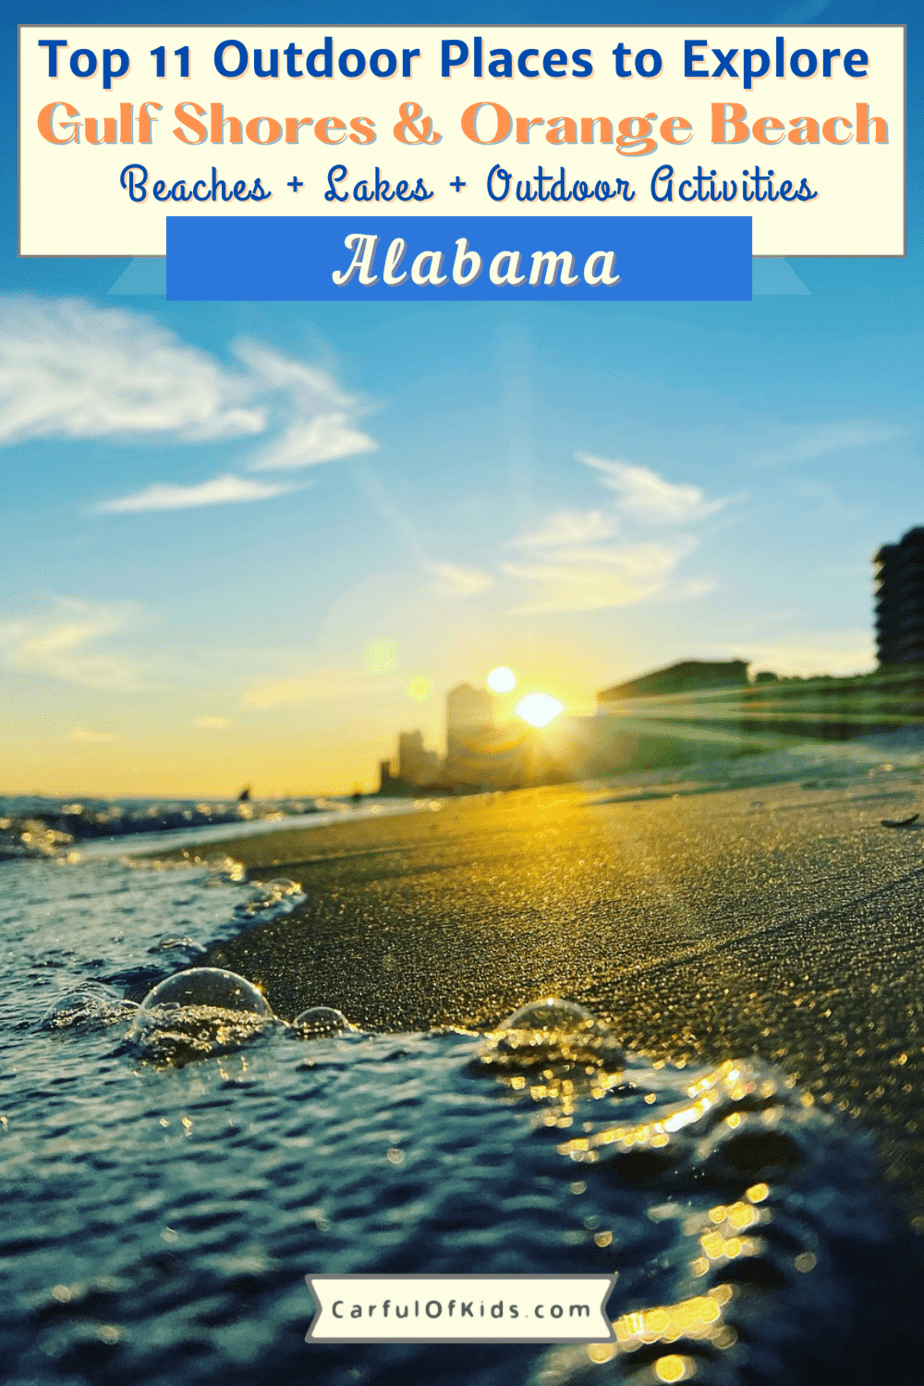 Located on the white sands and emerald water of Gulf Shores Alabama, find lots of outdoor activities like miles of beaches along with fishing and bike riding. Here's a state park that offers kayaking and find rental boats in Gulf Shores as well. Top Things to do in Gulf Shores | Alabama Beaches #GulfShores 